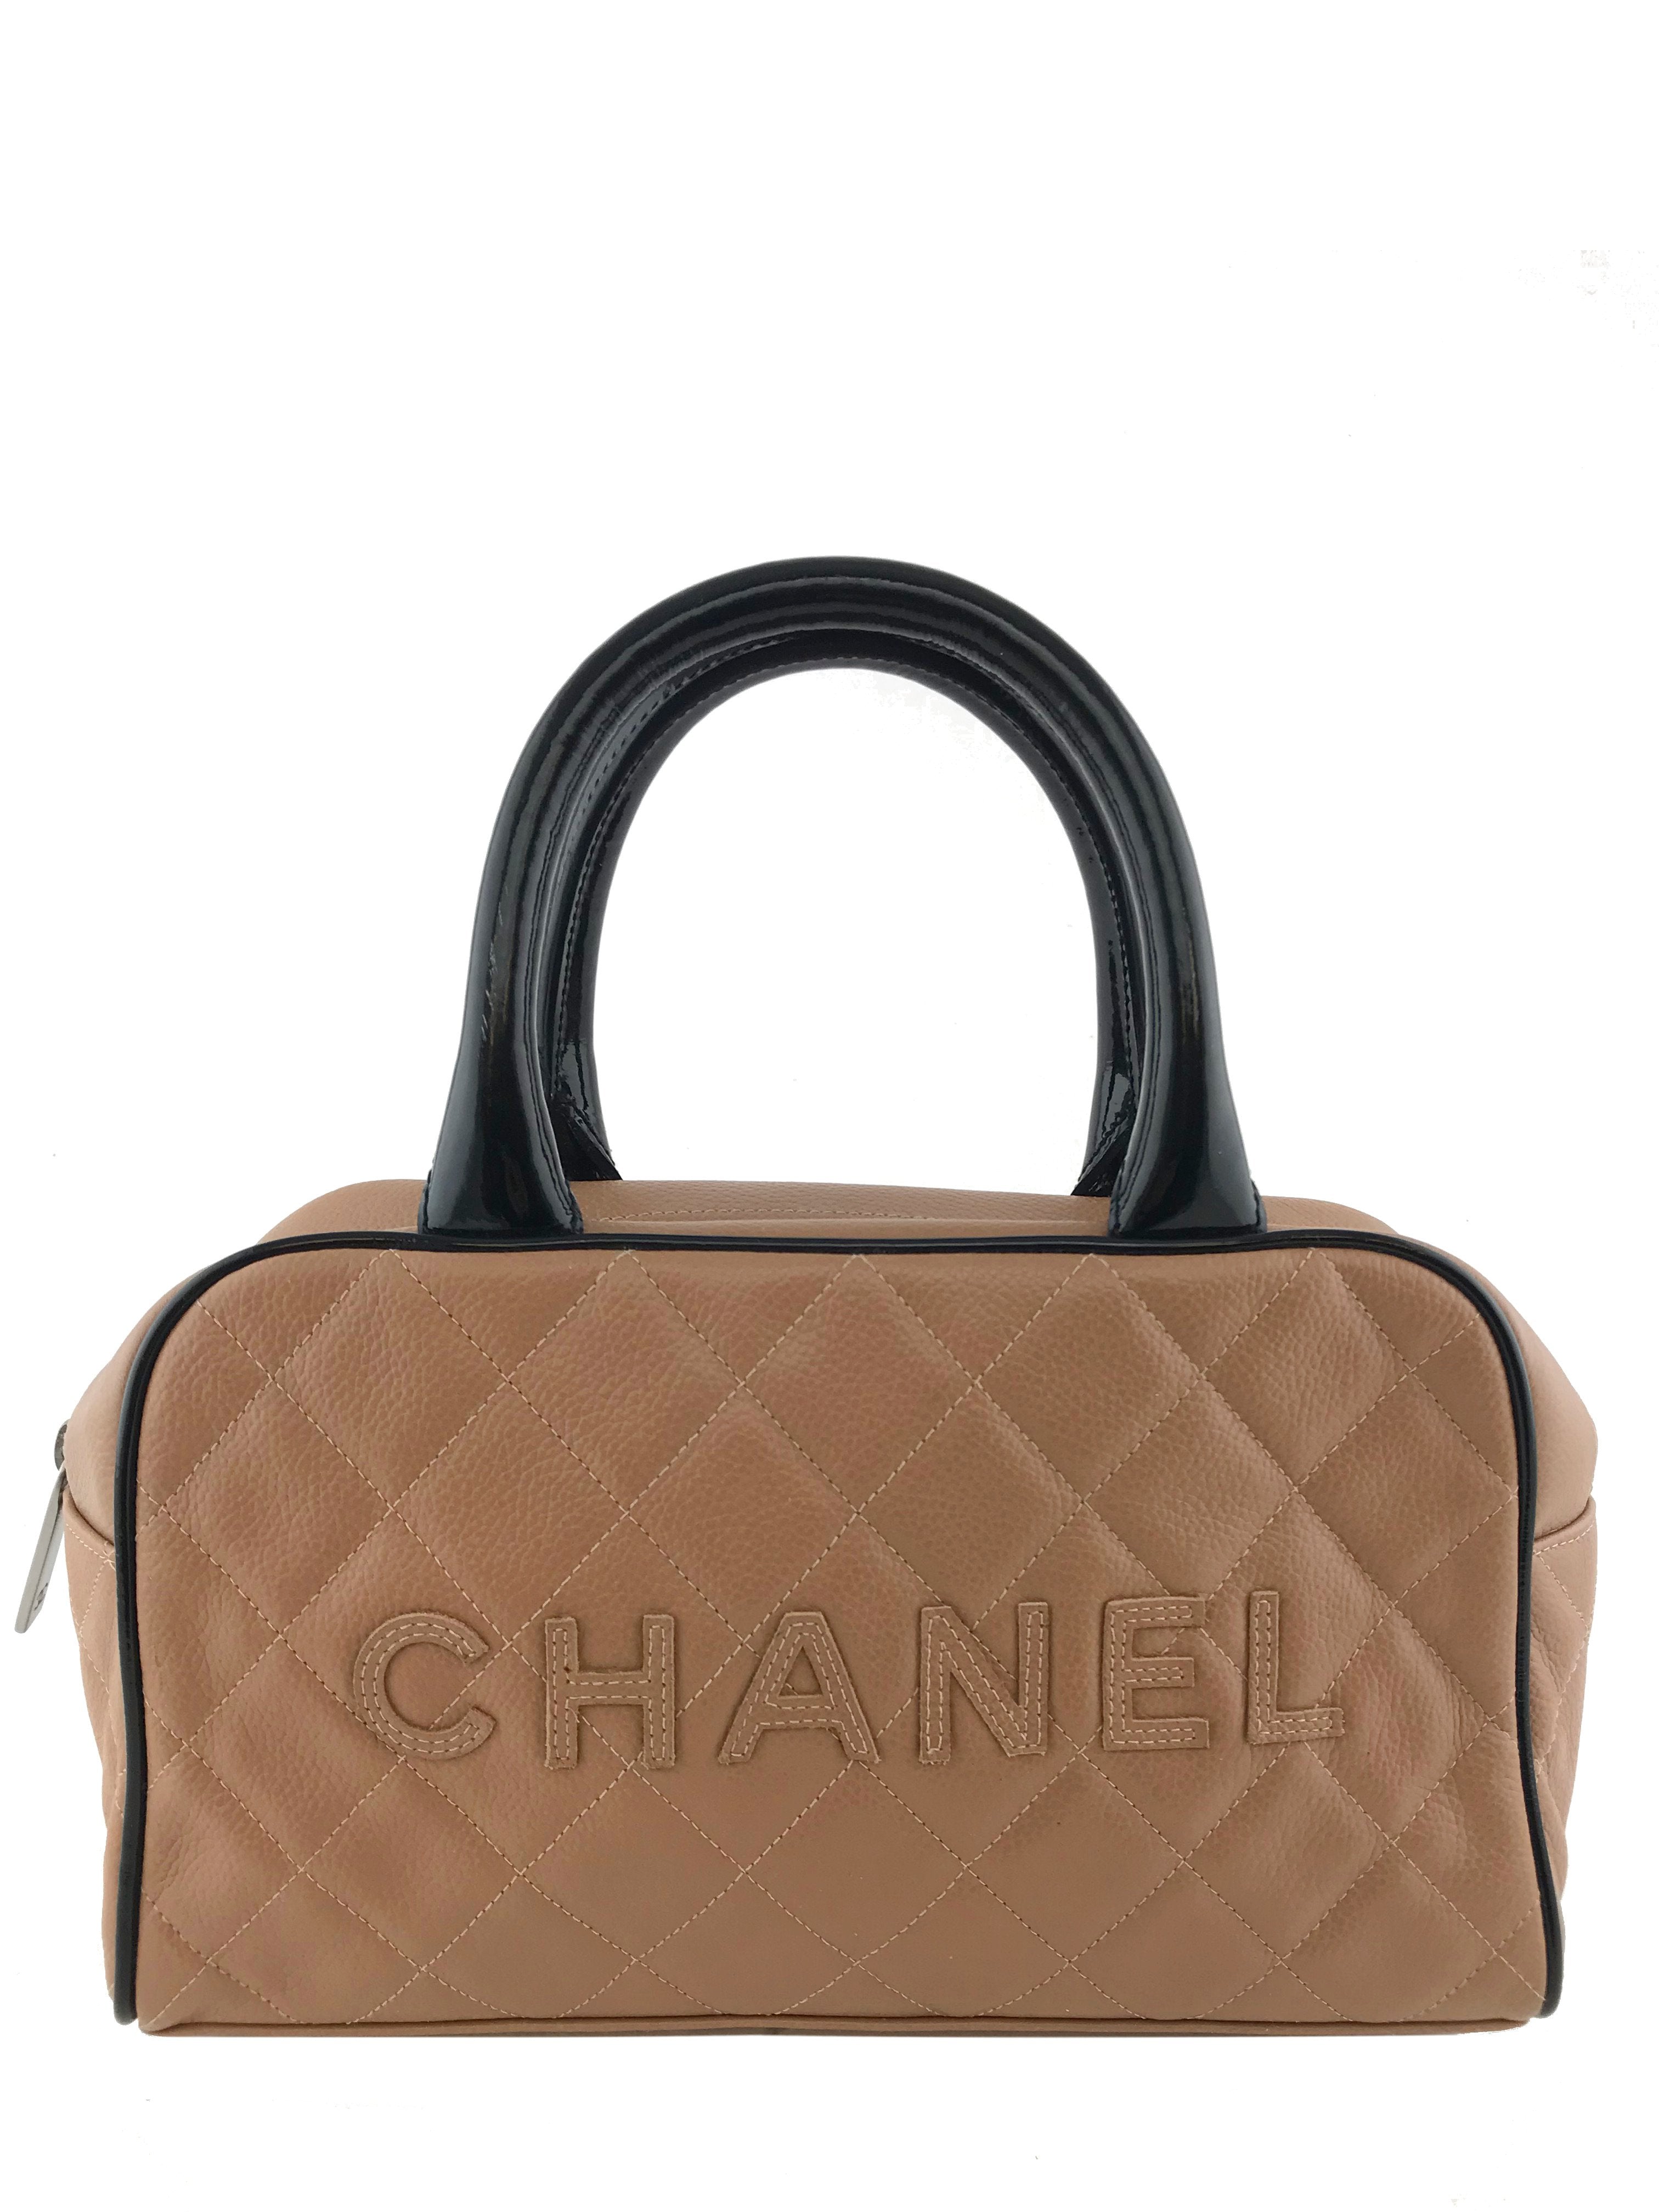 Chanel Quilted Caviar Leather Small Bowler Bag